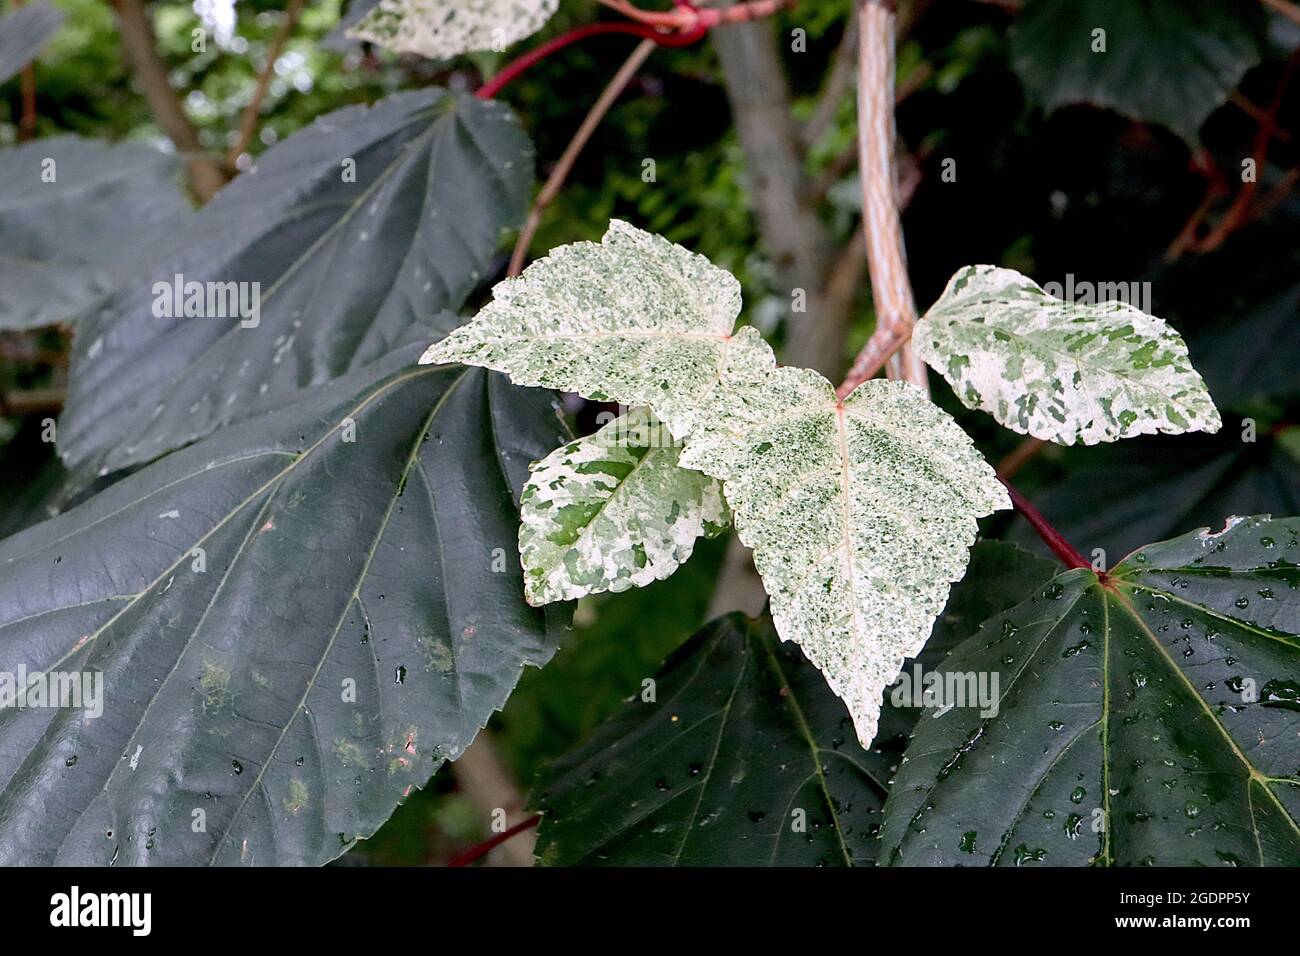 Acer x conspicuum ‘Red Flamingo’  maple Red Flamingo – dark green and cream leaves splashed and mottled with pink, red stems,  July, England, UK Stock Photo